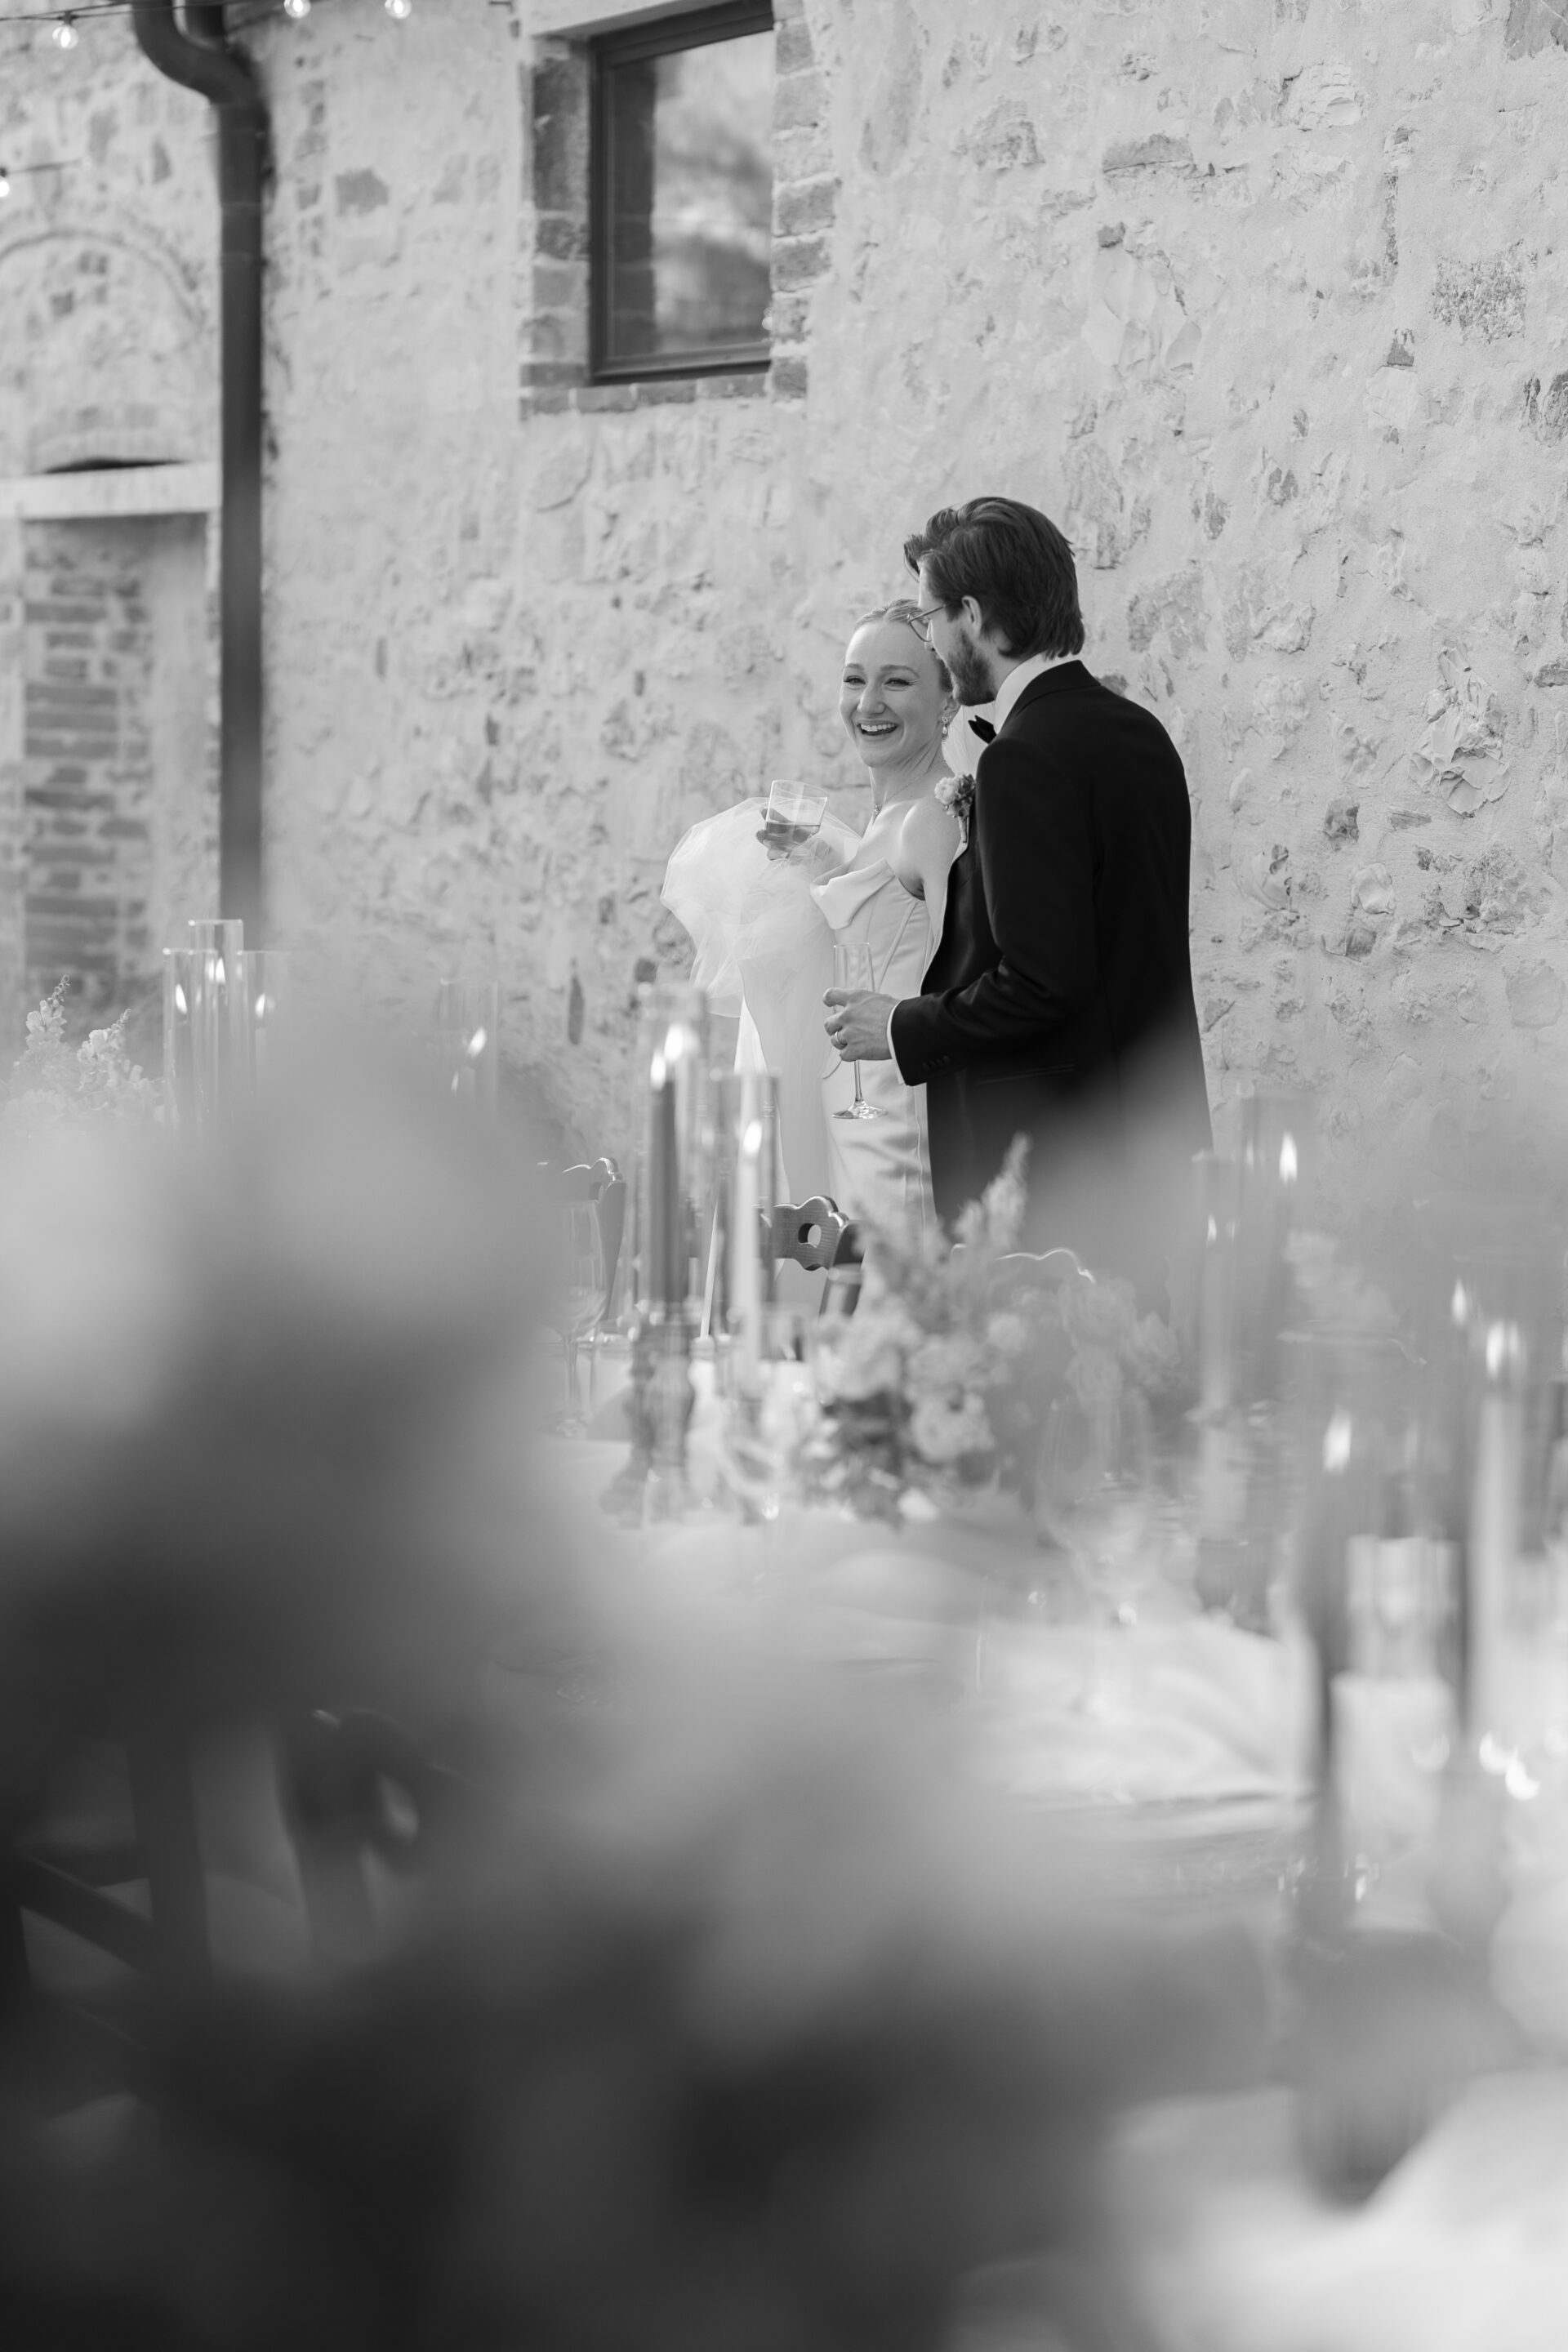 The bride and groom look at their tablescape for their luxury Italian wedding